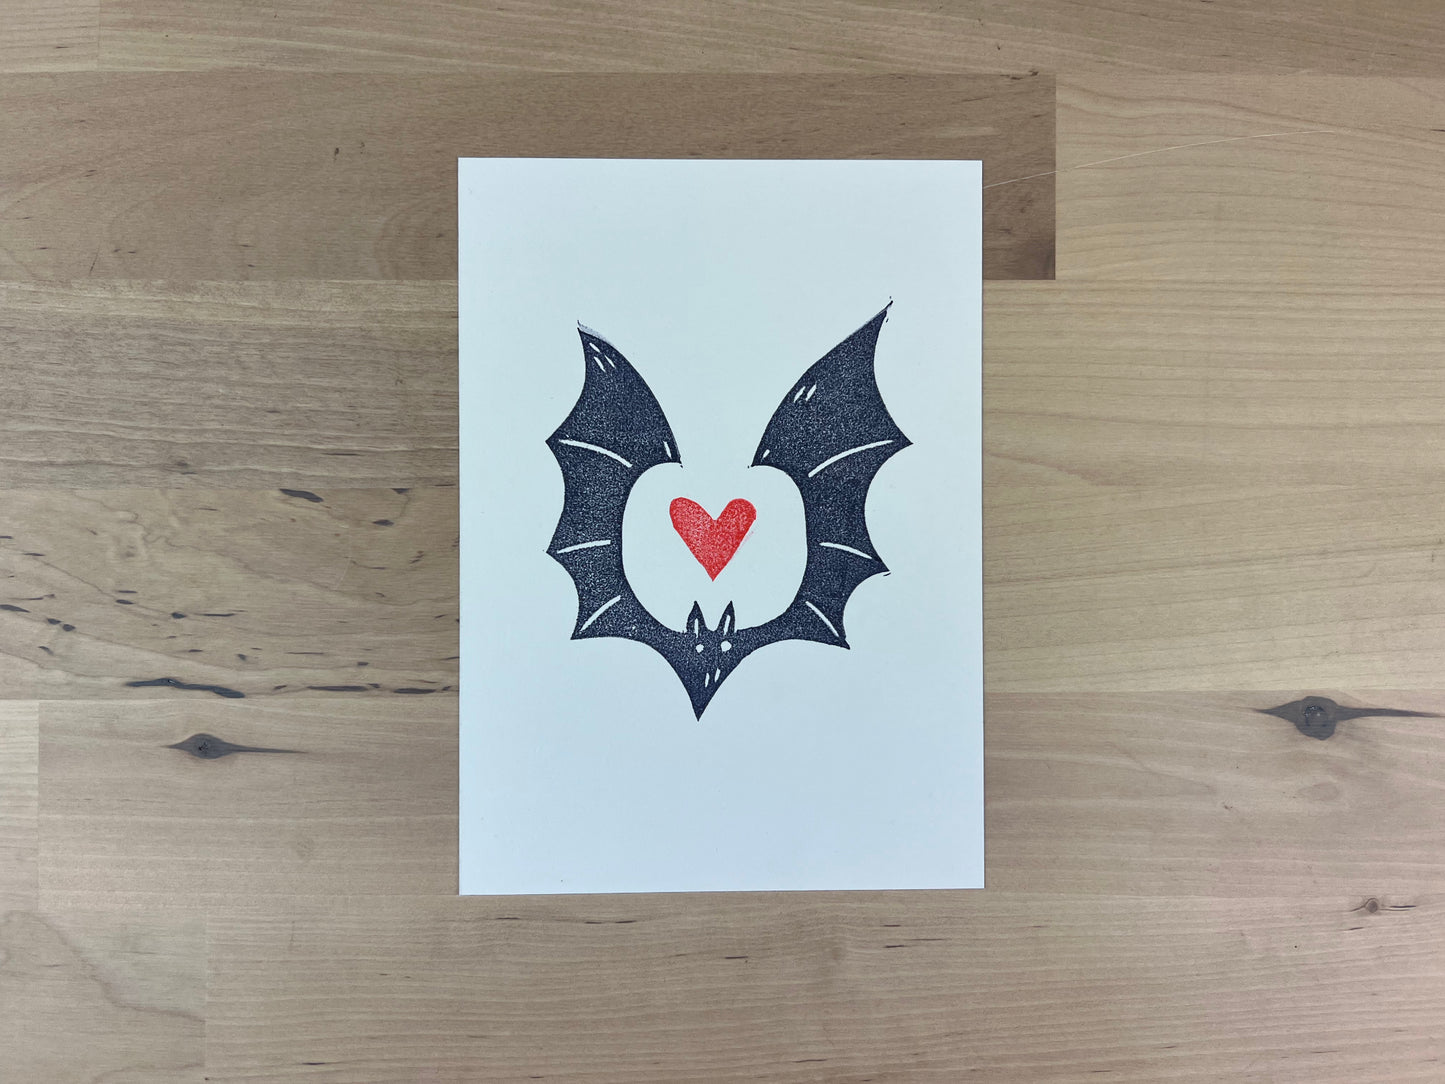 Hand printed illustration of a navy blue bat with a red heart between it's wings.